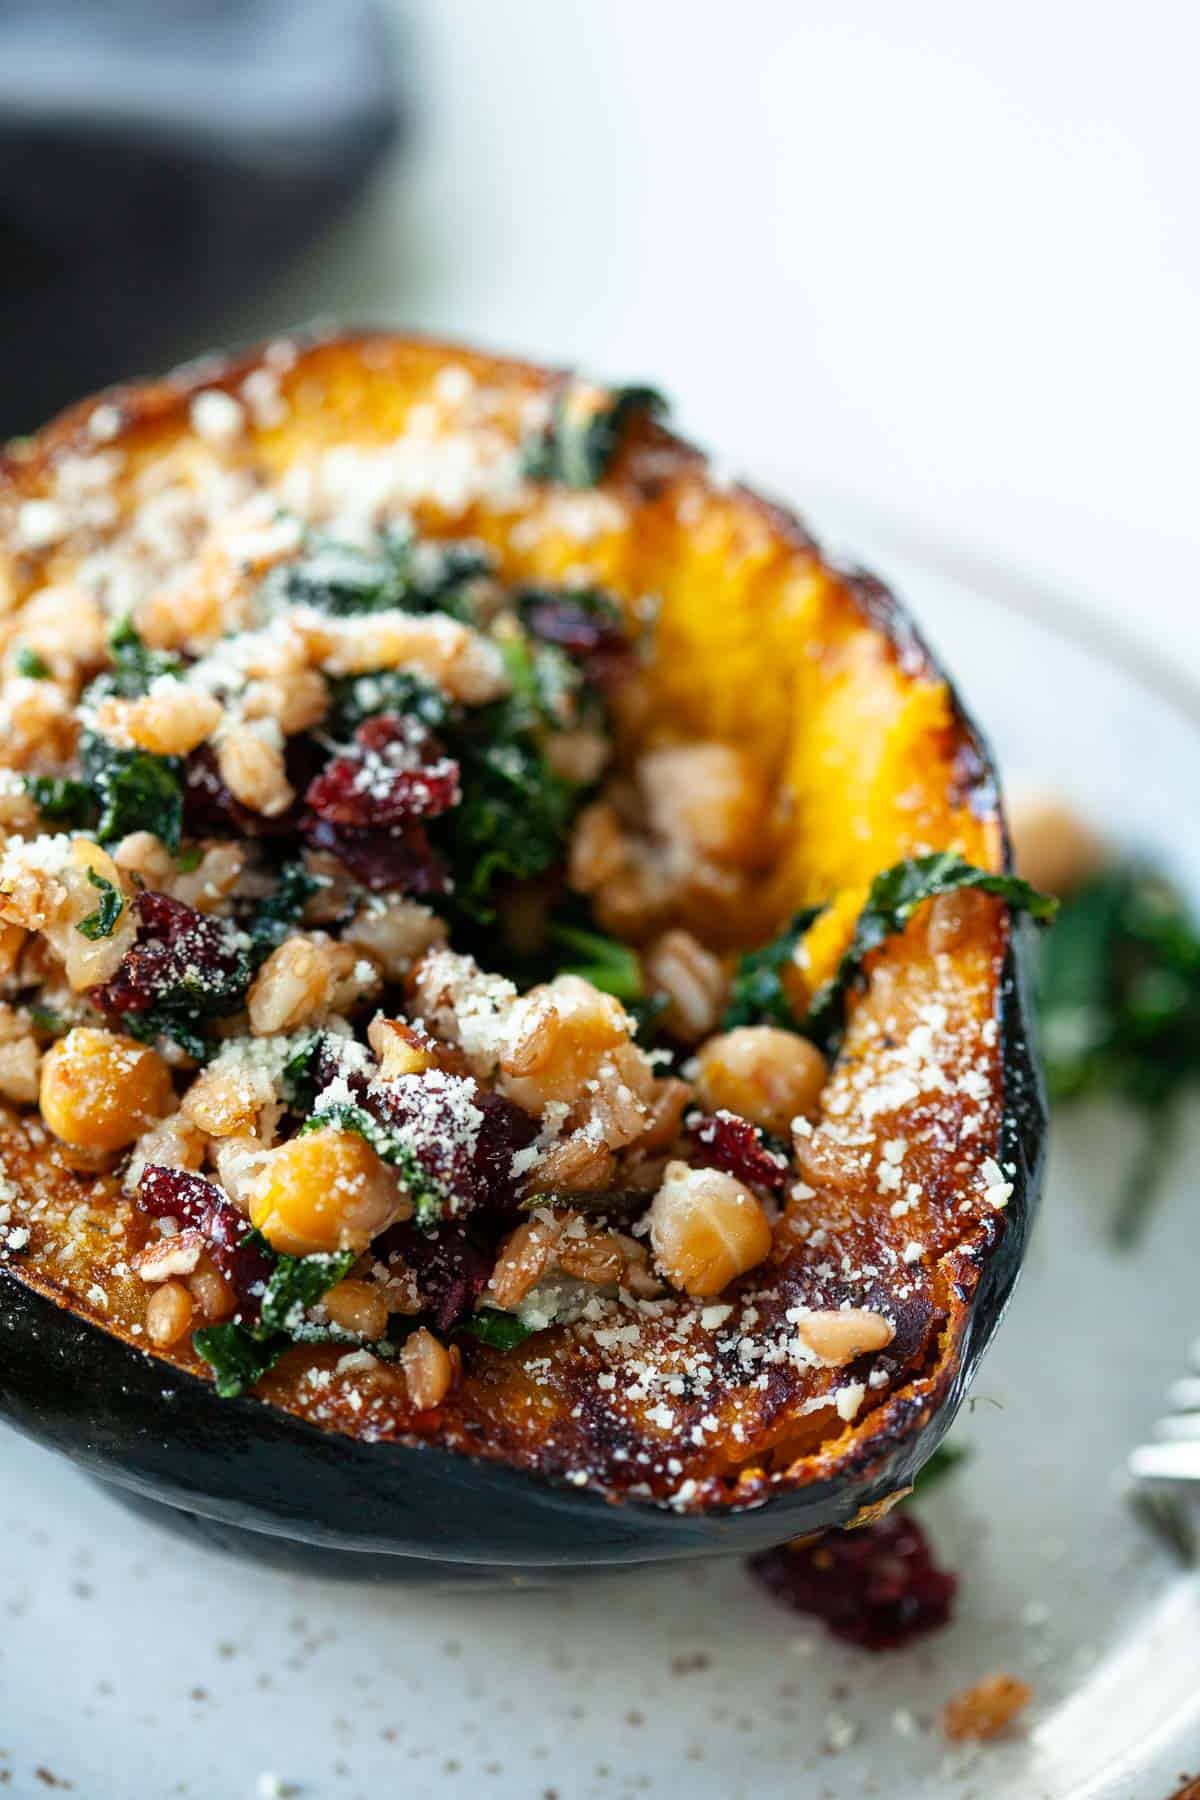 roasted acorn squash stuffed with chickpeas, kale, cranberries, farro, parmesan cheese on grey speckled plate